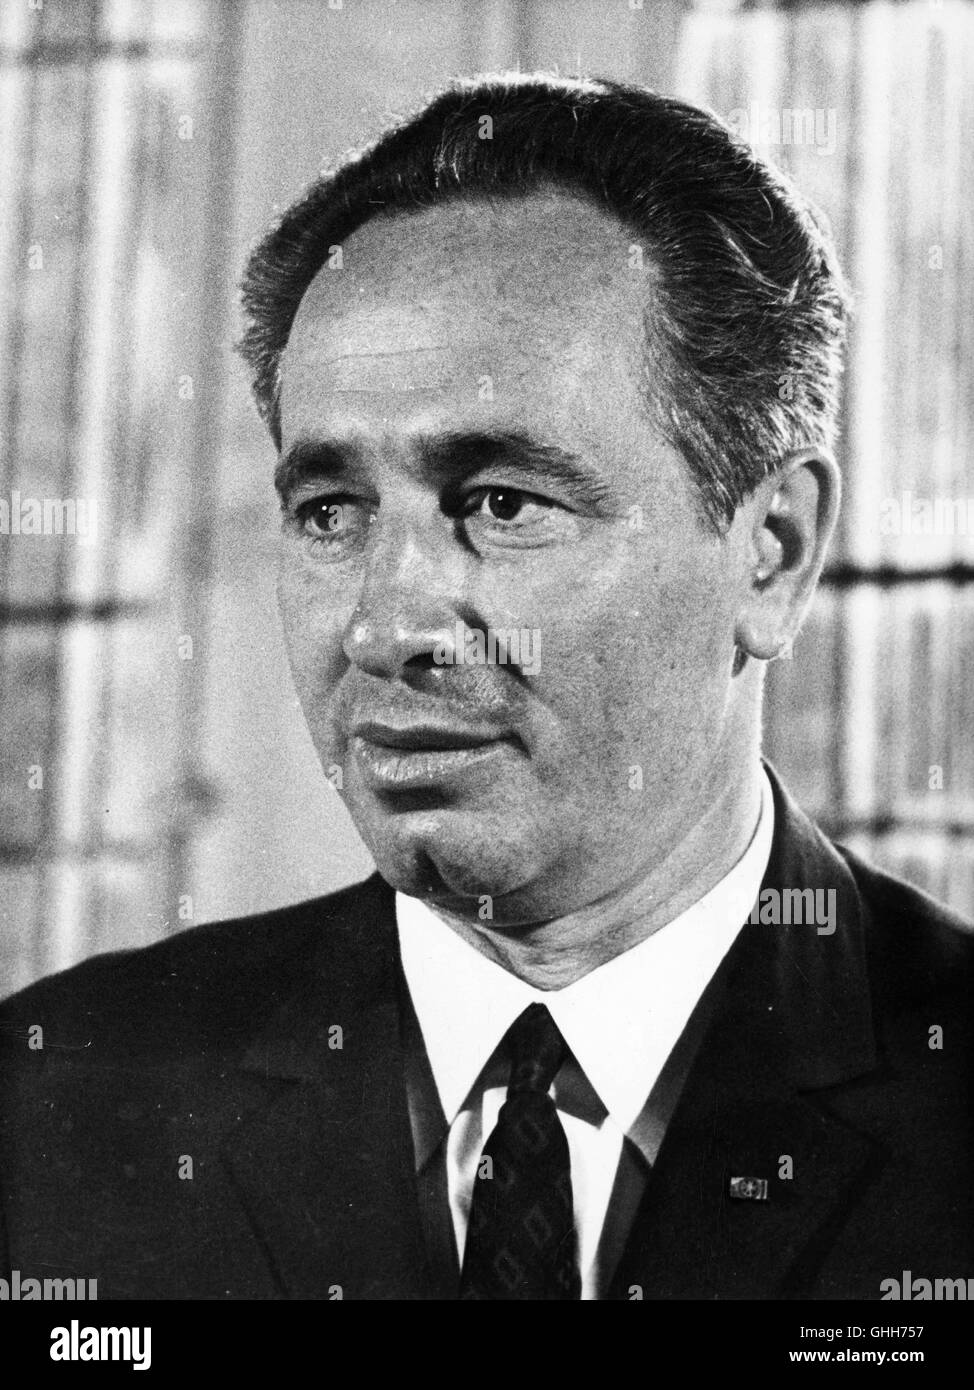 SHIMON PERES (2 August 1923 - 28 September 2016) was a Polish-born Israeli statesman. Born Szymon Perski, he was the ninth President of Israel from 2007 to 2014, served twice as the Prime Minister of Israel and twice as Interim Prime Minister, and he was a member of 12 cabinets in a political career spanning over 66 years. Peres won the 1994 Nobel Peace Prize together with Yitzhak Rabin and Yasser Arafat for the peace talks that he participated in as Israeli Foreign Minister, producing the Oslo Accords. PICTURED: A young SHIMON PERES (Credit Image: © Keystone Press Agency/Keystone USA via ZUMA Stock Photo